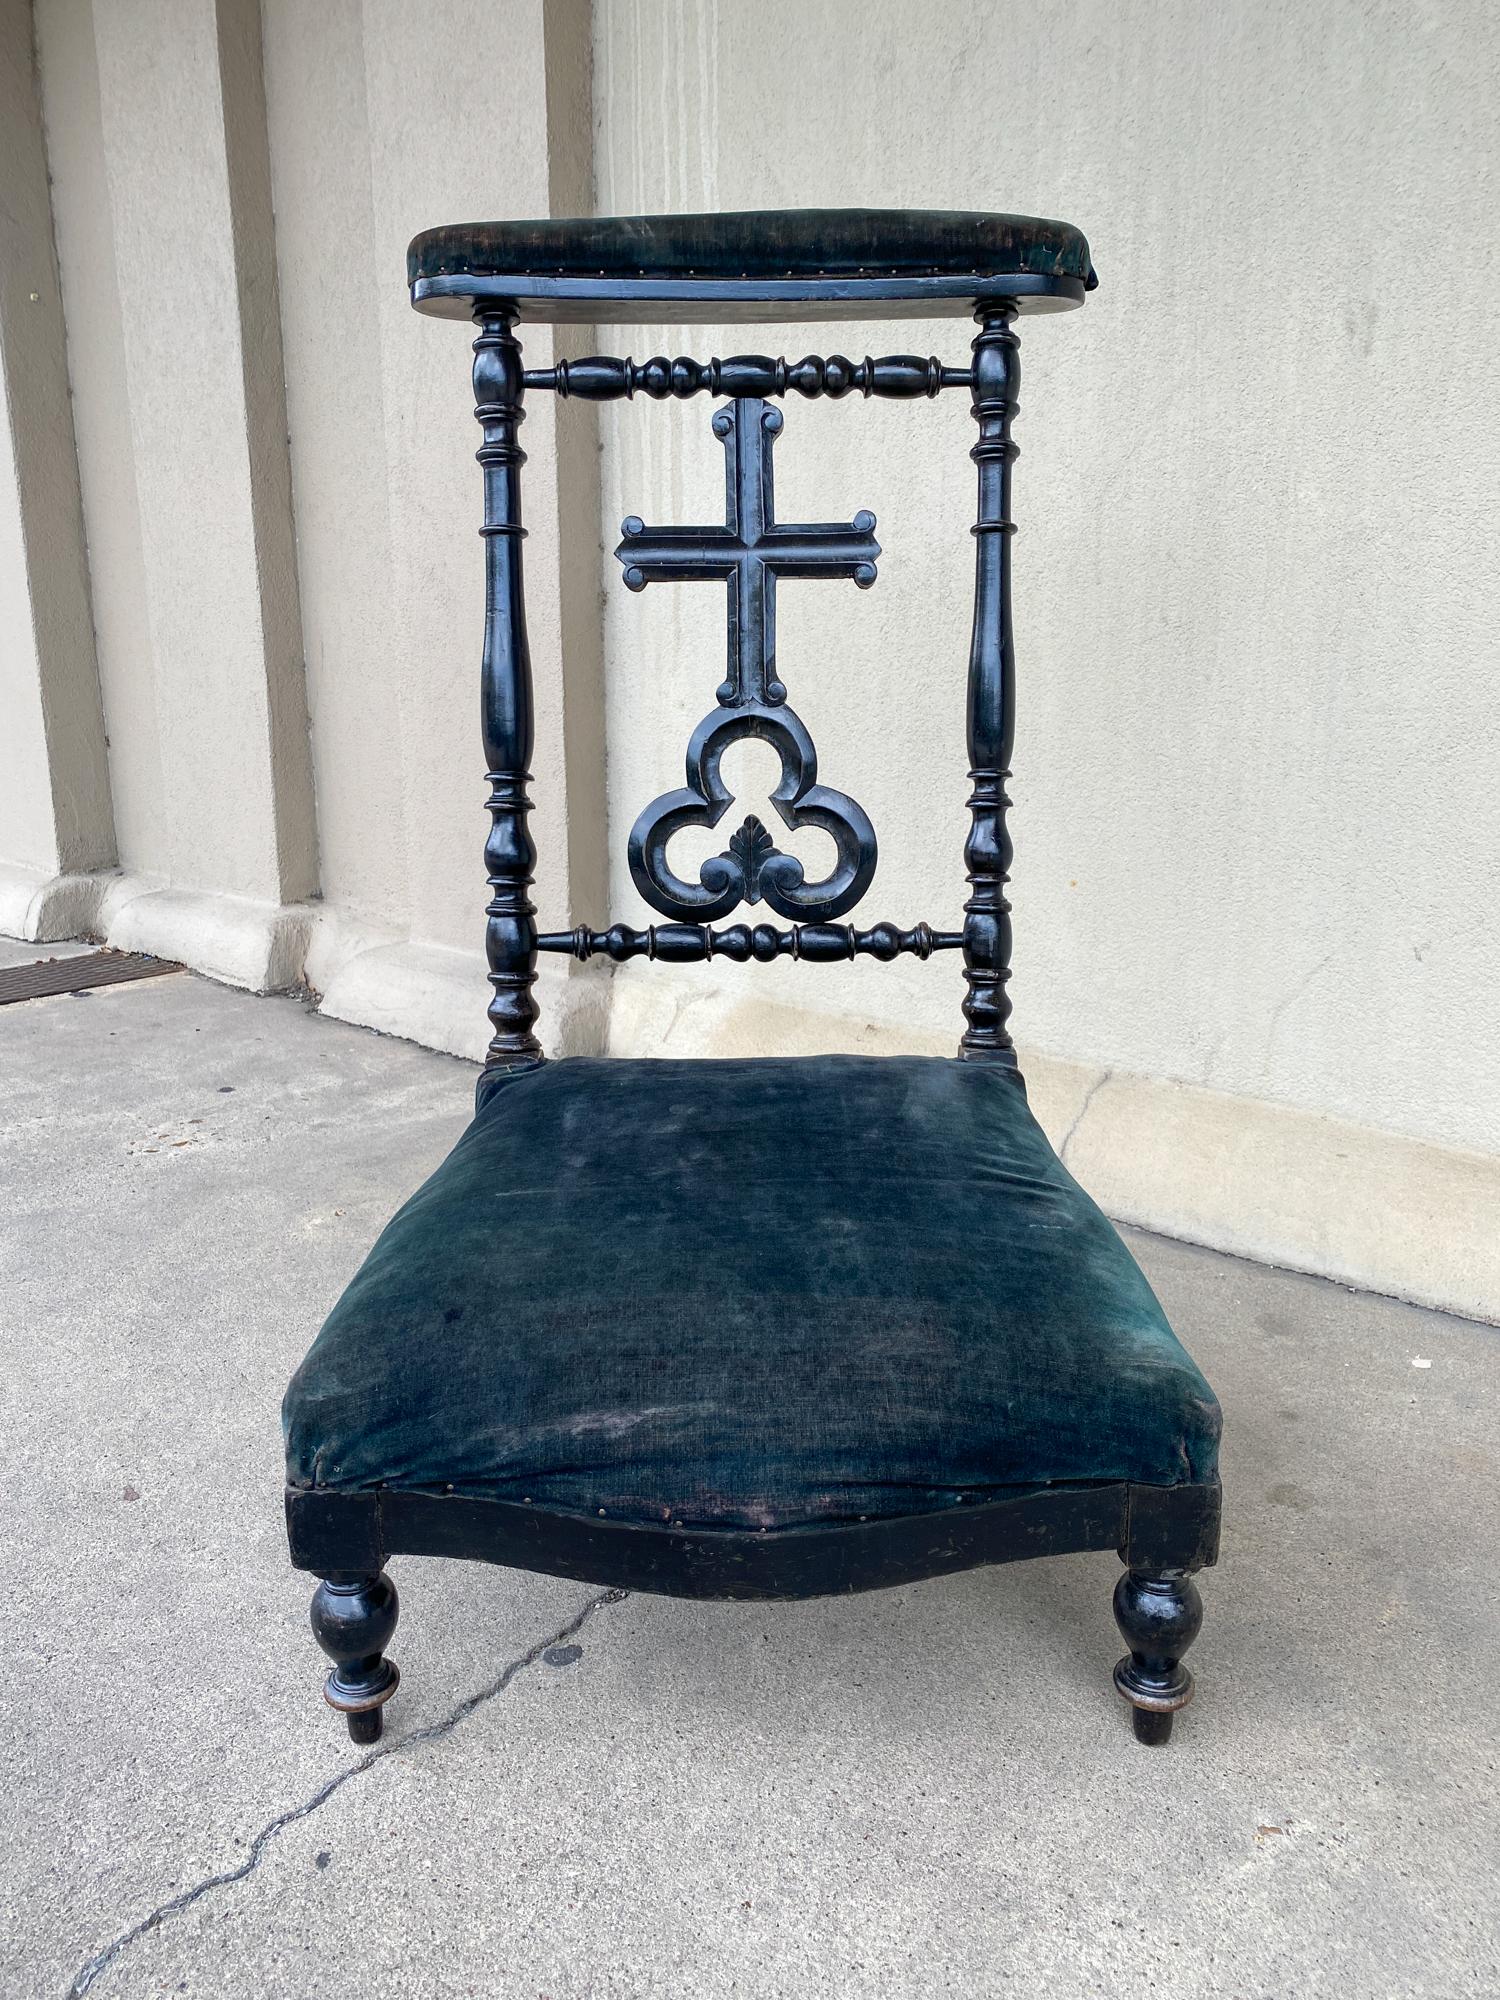 This antique French Napoleon III kneeler chair dates to 1850 and is crafted in ebonized wood and deep green velvet upholstery. With ornate carvings on the back of the chair, featuring a cross, trefoil design along with turned details on the side and